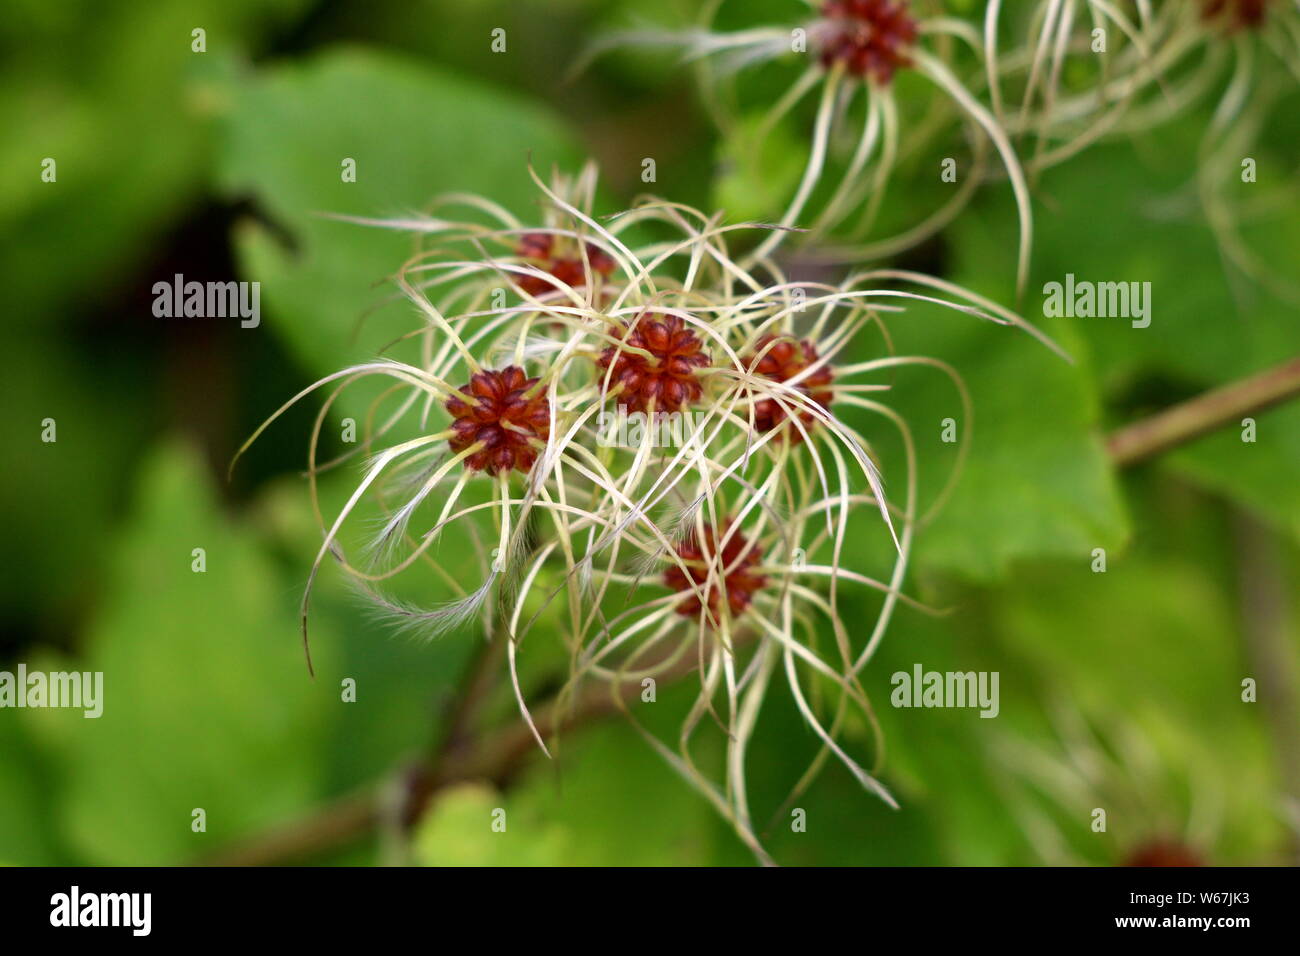 Old mans beard or Clematis vitalba or Travellers joy climbing shrub plant with long silky appendages growing on single stem Stock Photo